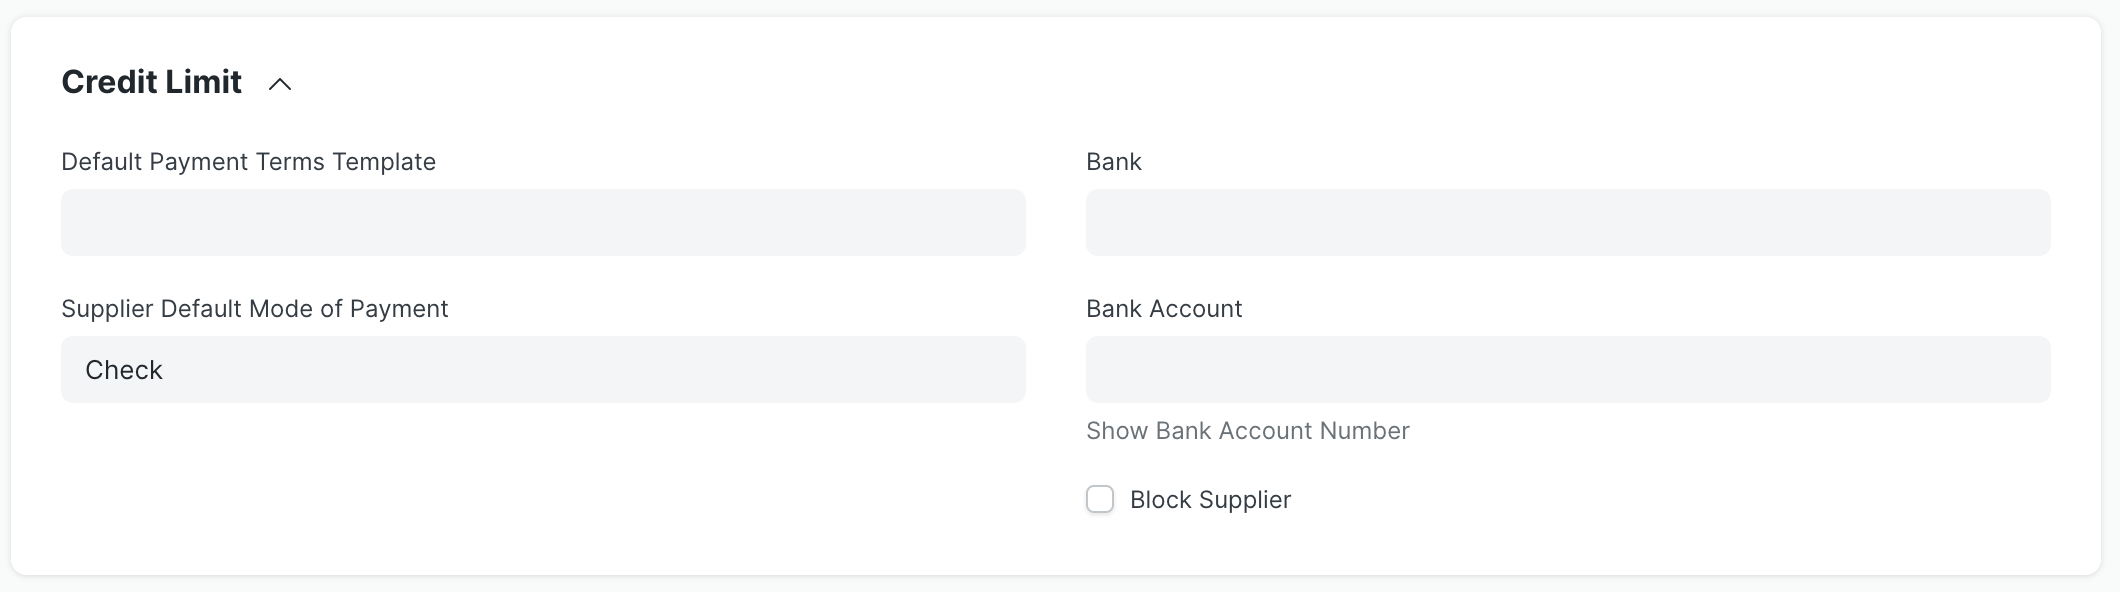 Supplier doctype detail showing the Credit Limit section expanded with new fields for Supplier Default Mode of Payment, Bank, and Bank Account.